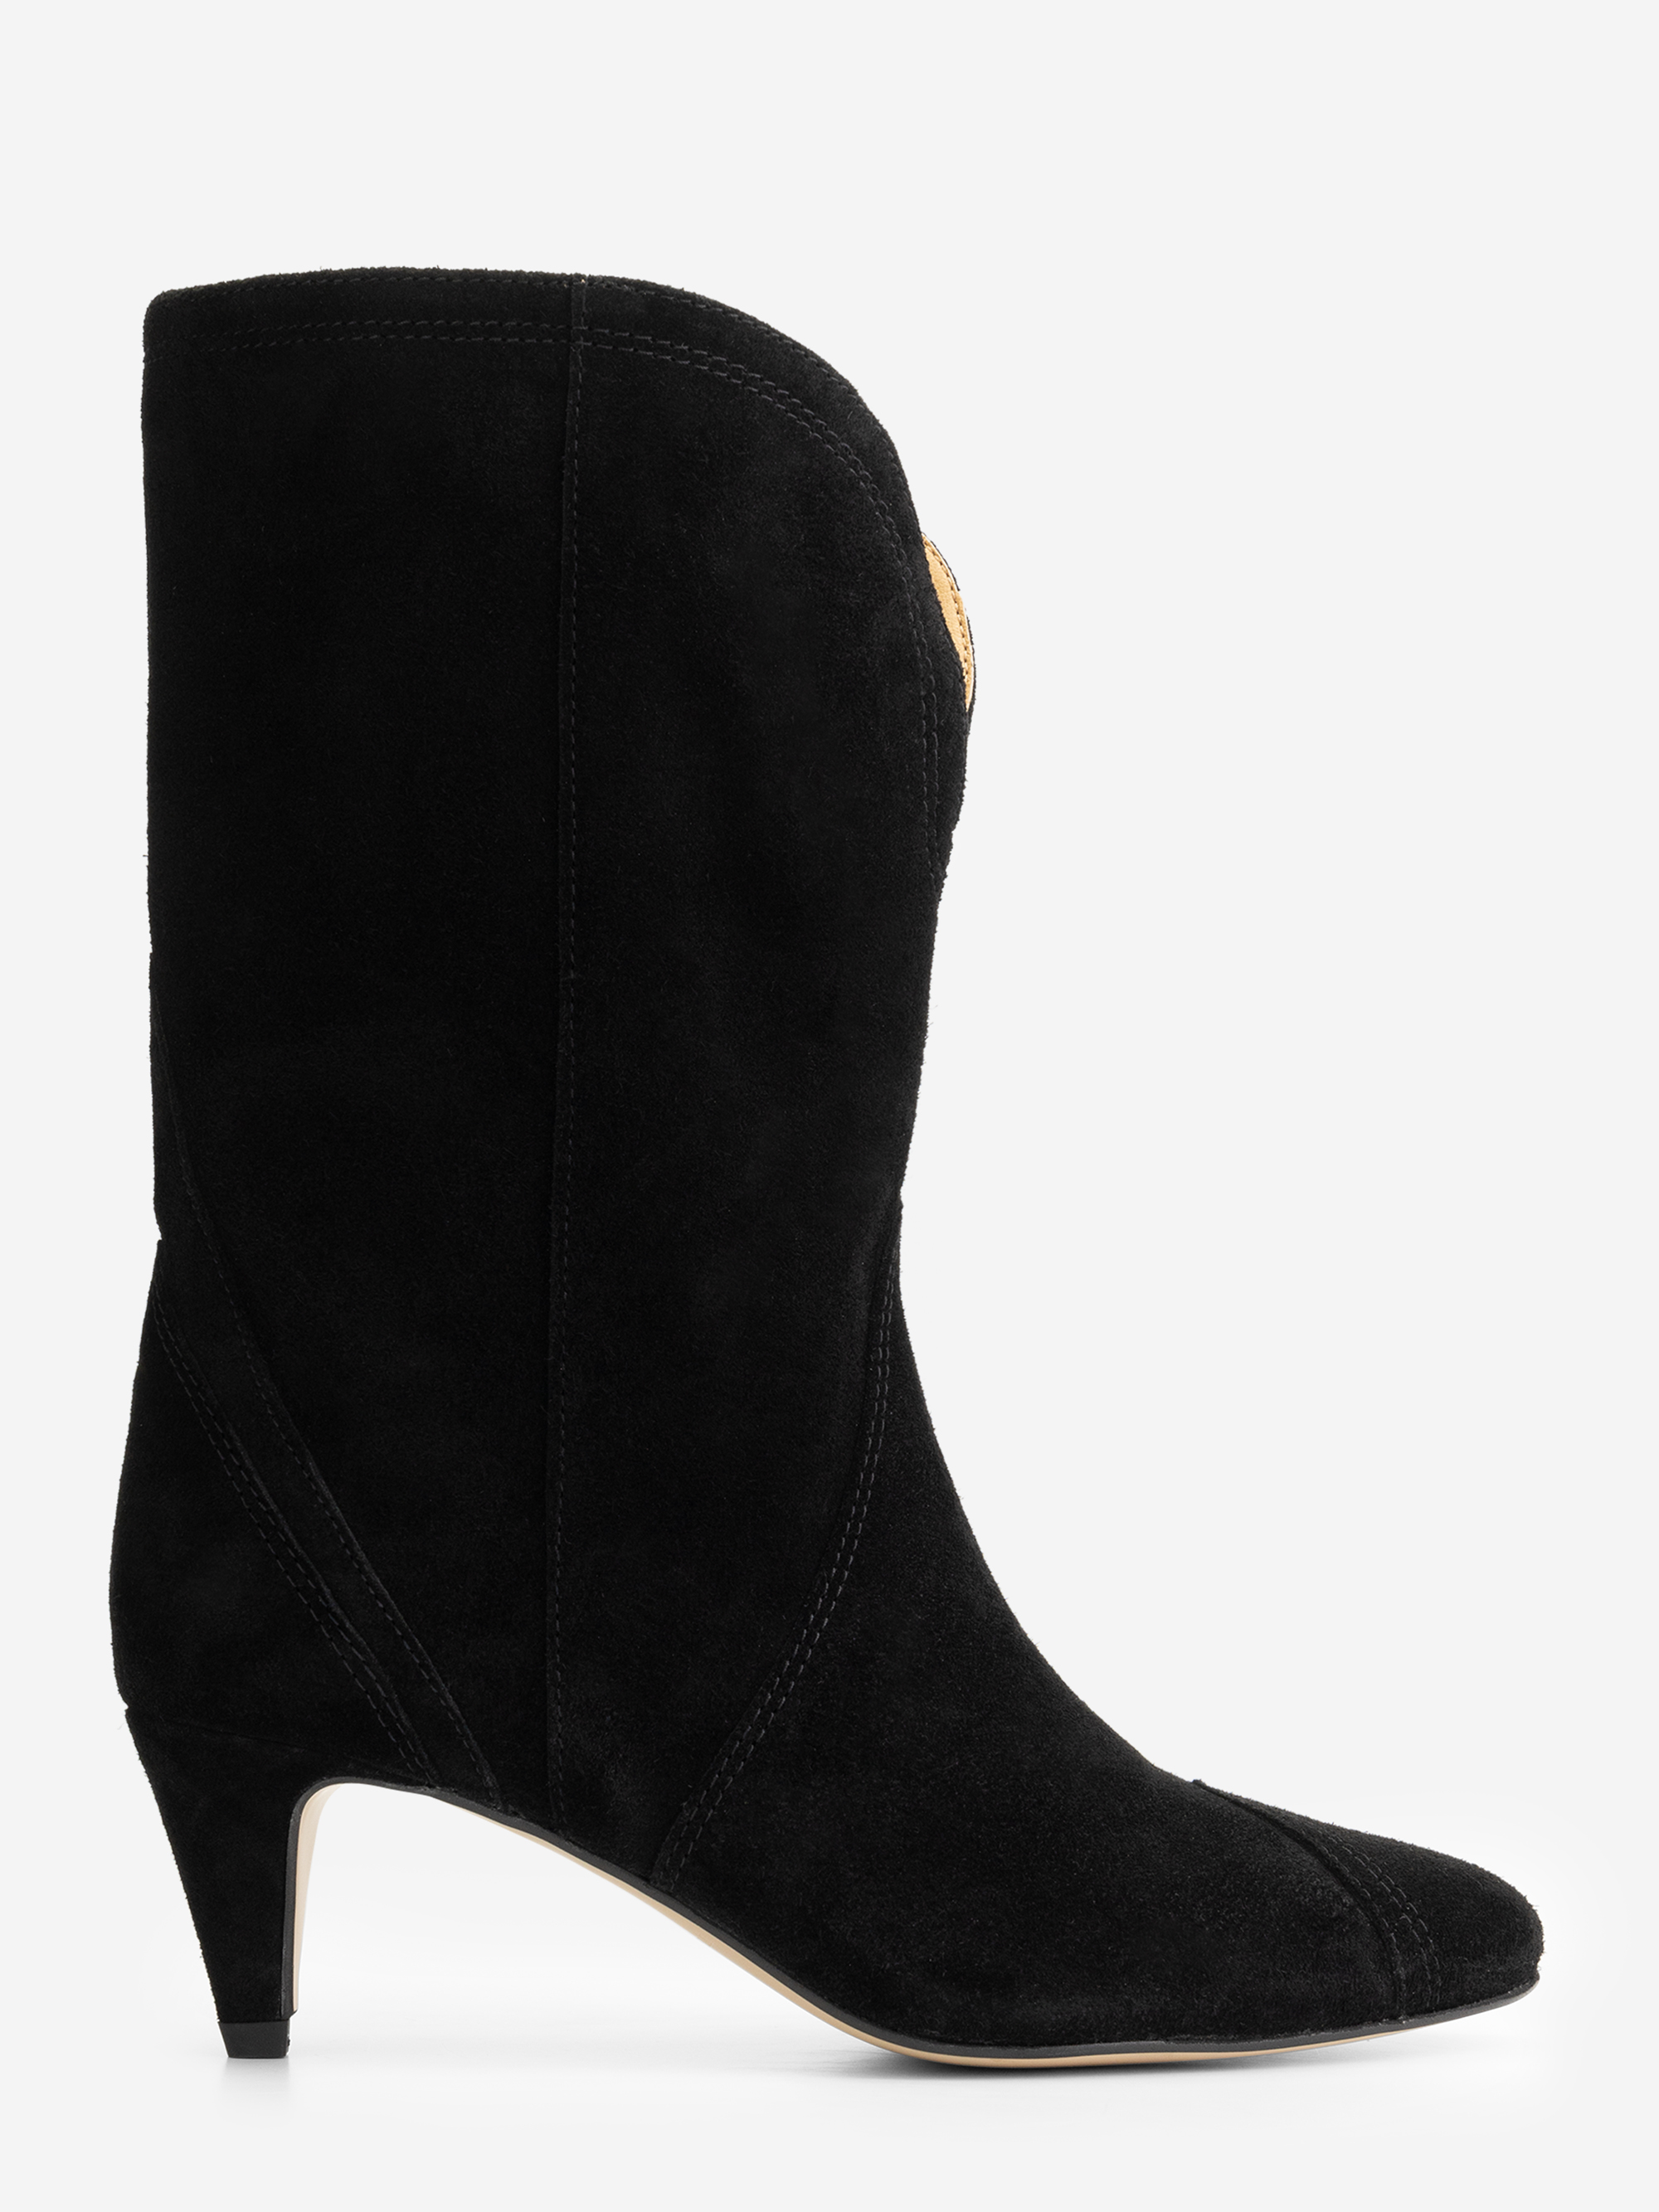 Suede boots with mid heel